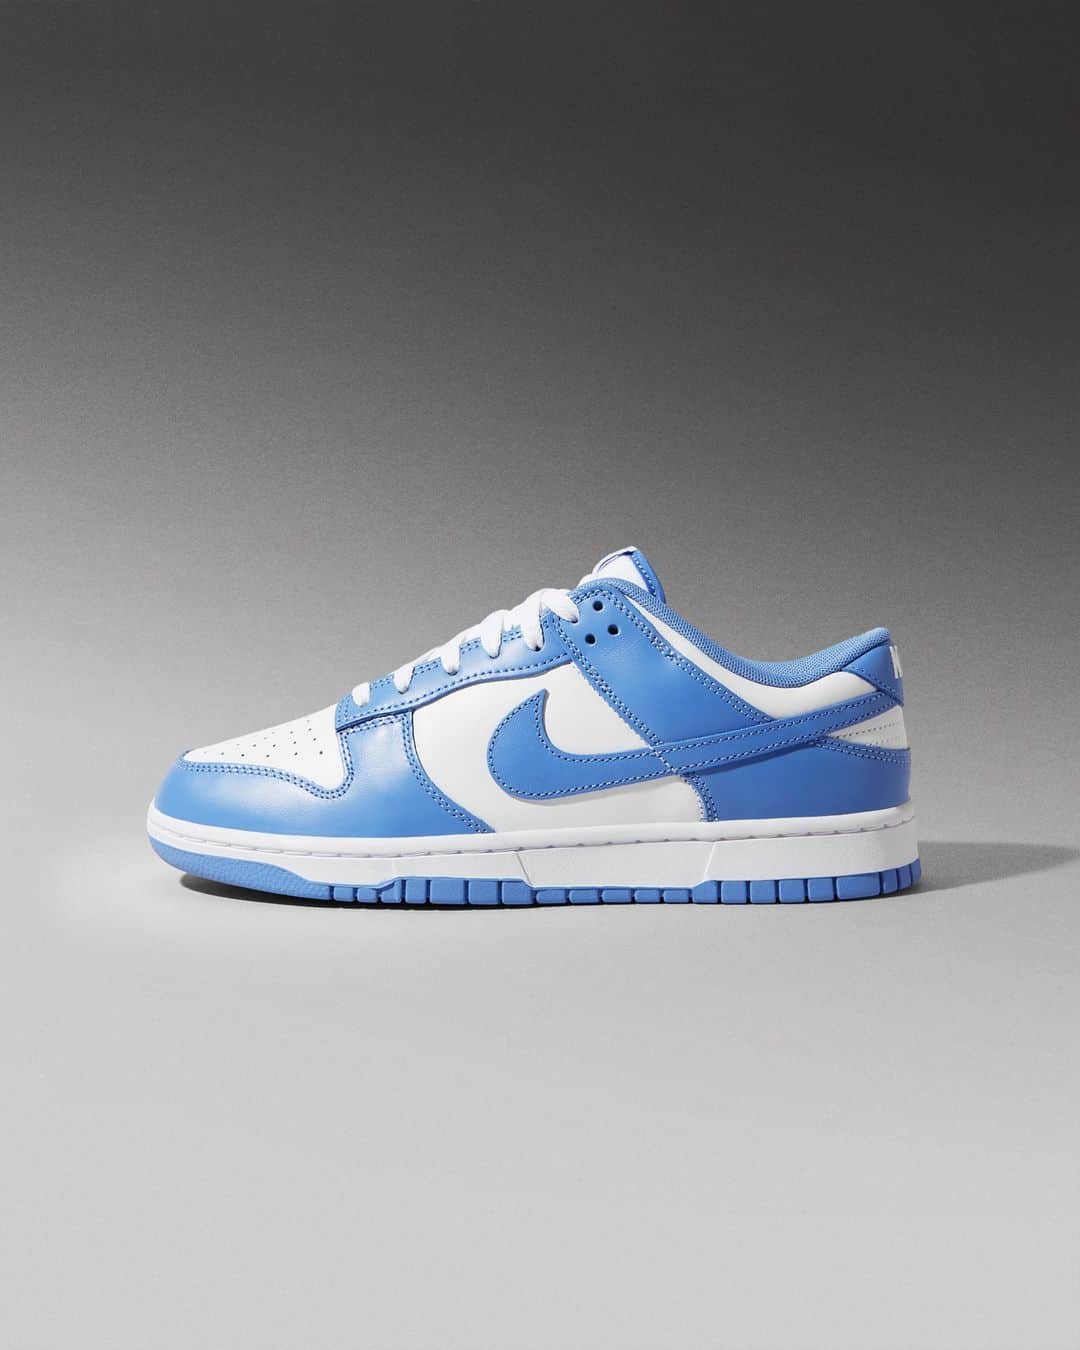 Flight Clubのインスタグラム：「On ice. The Dunk Low 'Polar Blue' emerges in a crisp white leather base with steel blue overlays. Timeless two-tone color blocking and the Nike-branded tongue tag keep this heritage look in peak lifestyle form.」